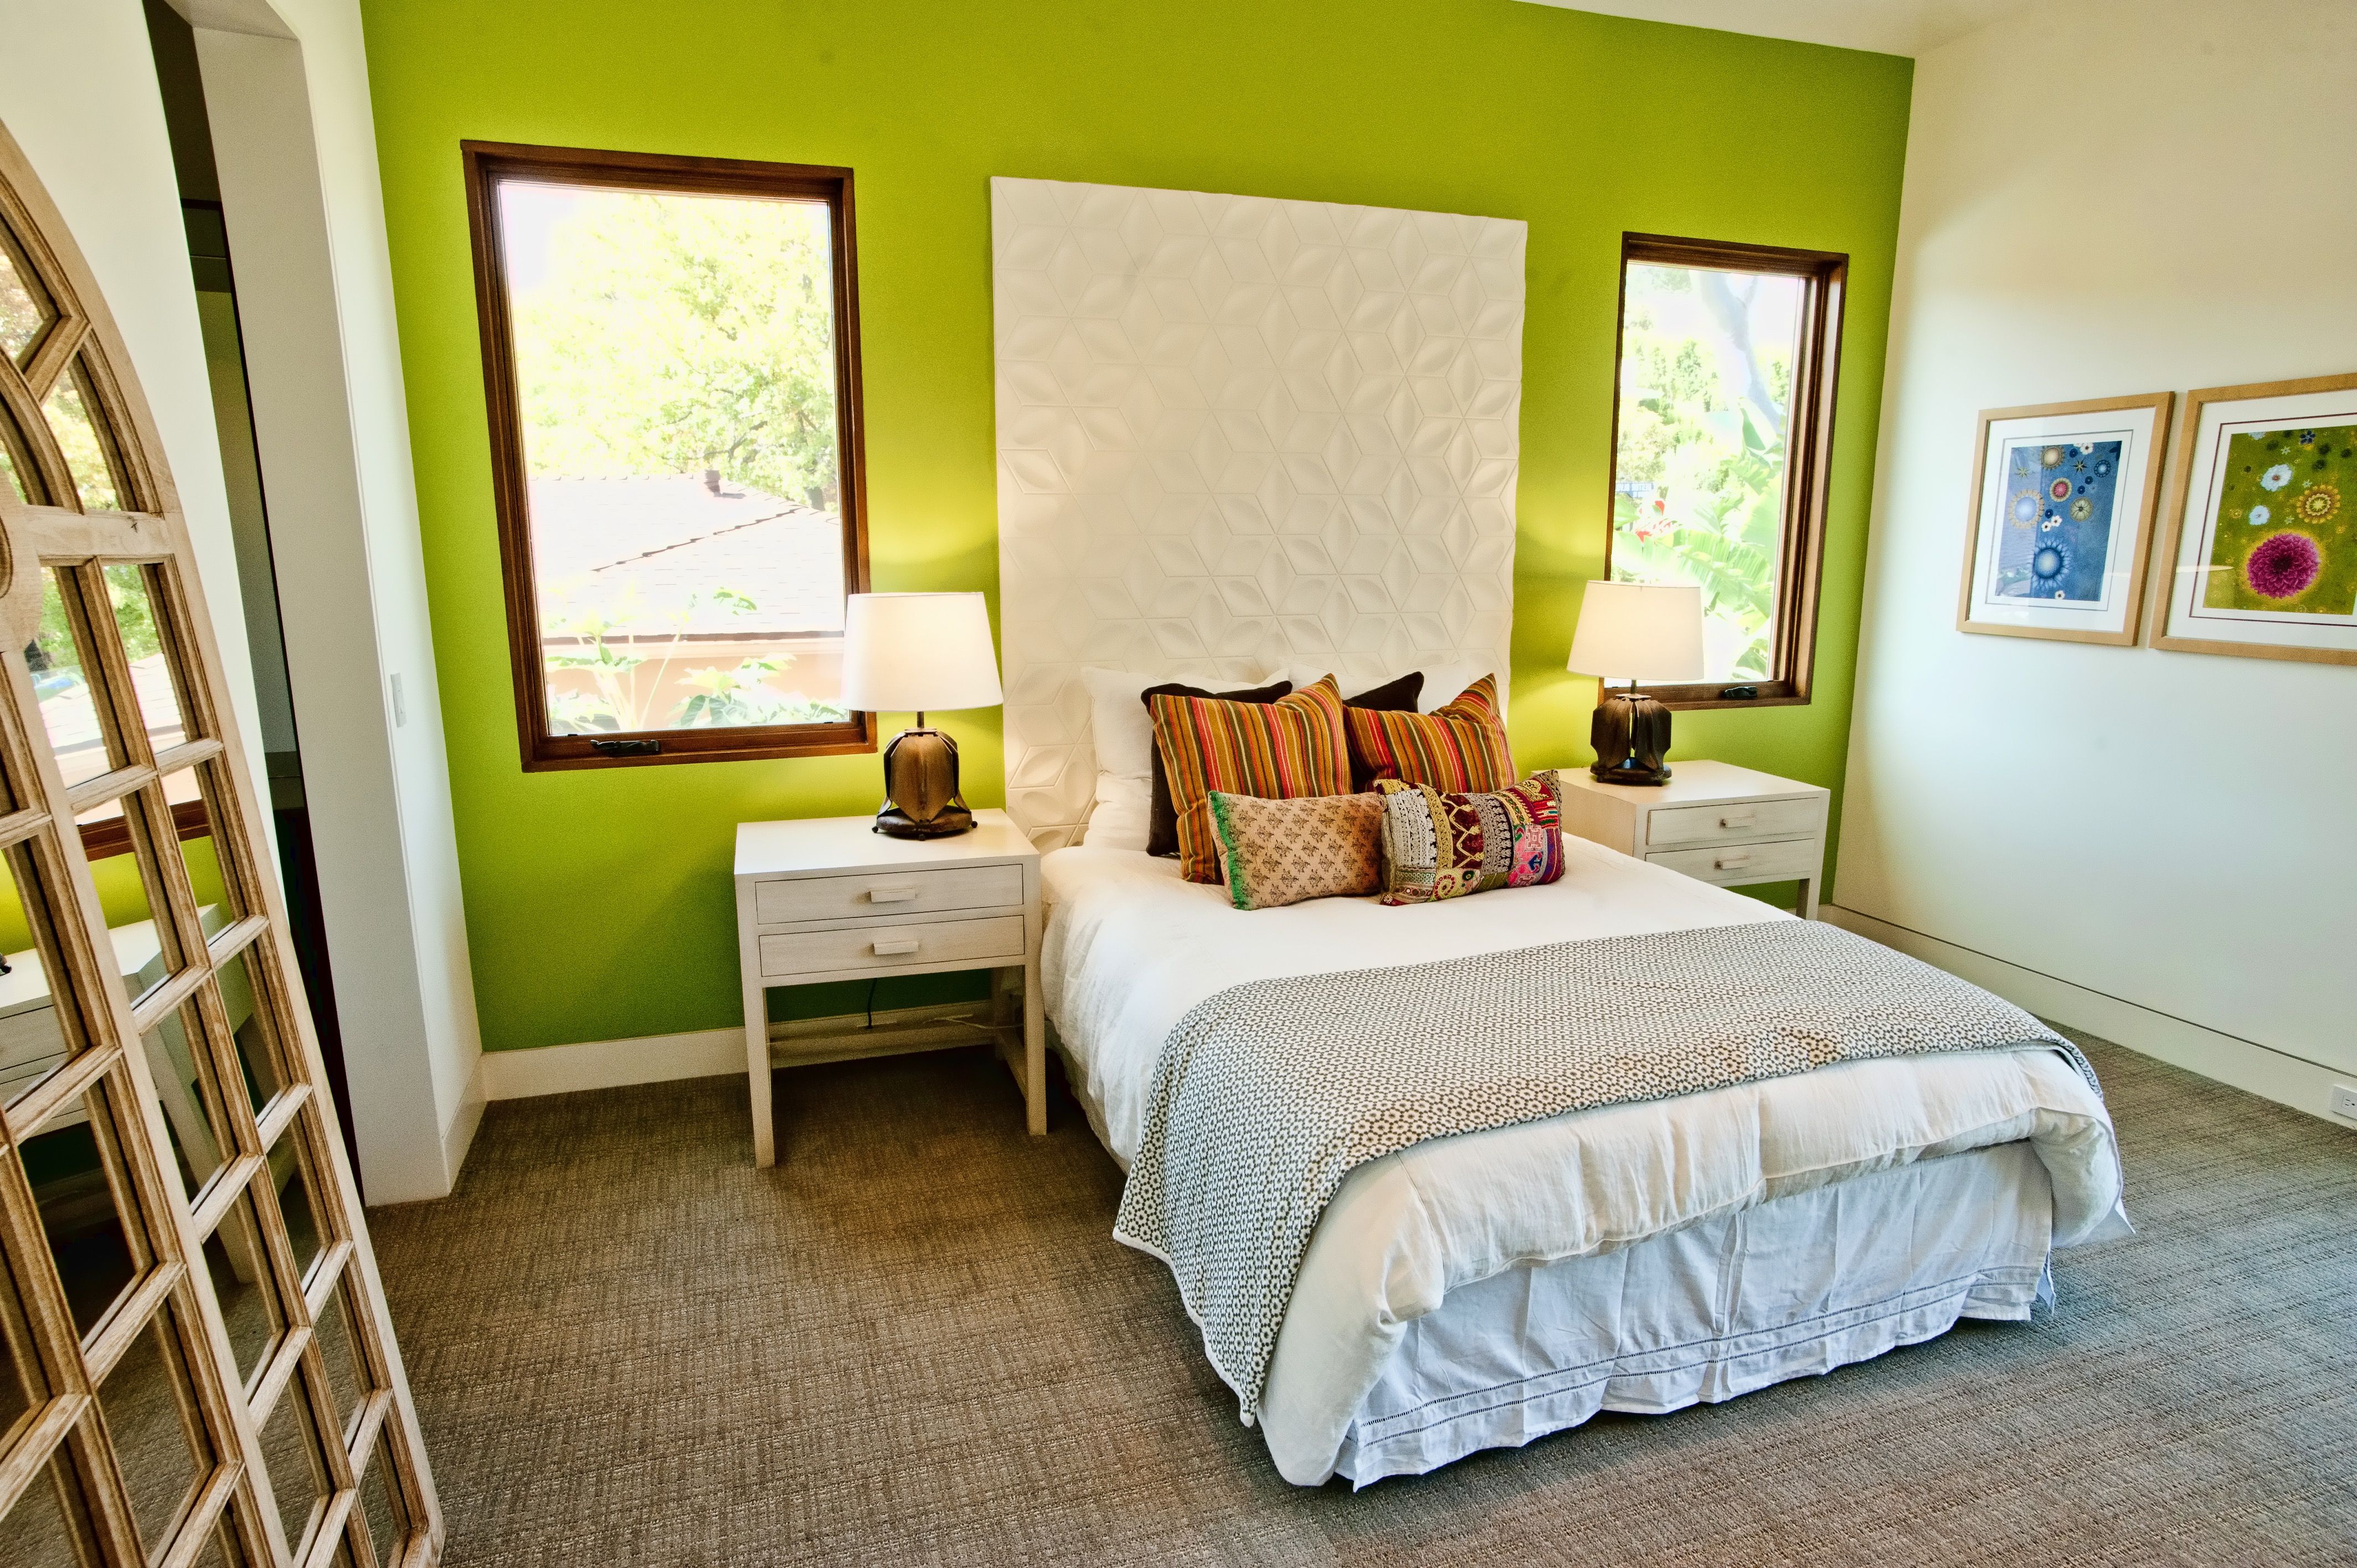 Easy Bedroom Remodel To Tropical Style (View 11 of 33)